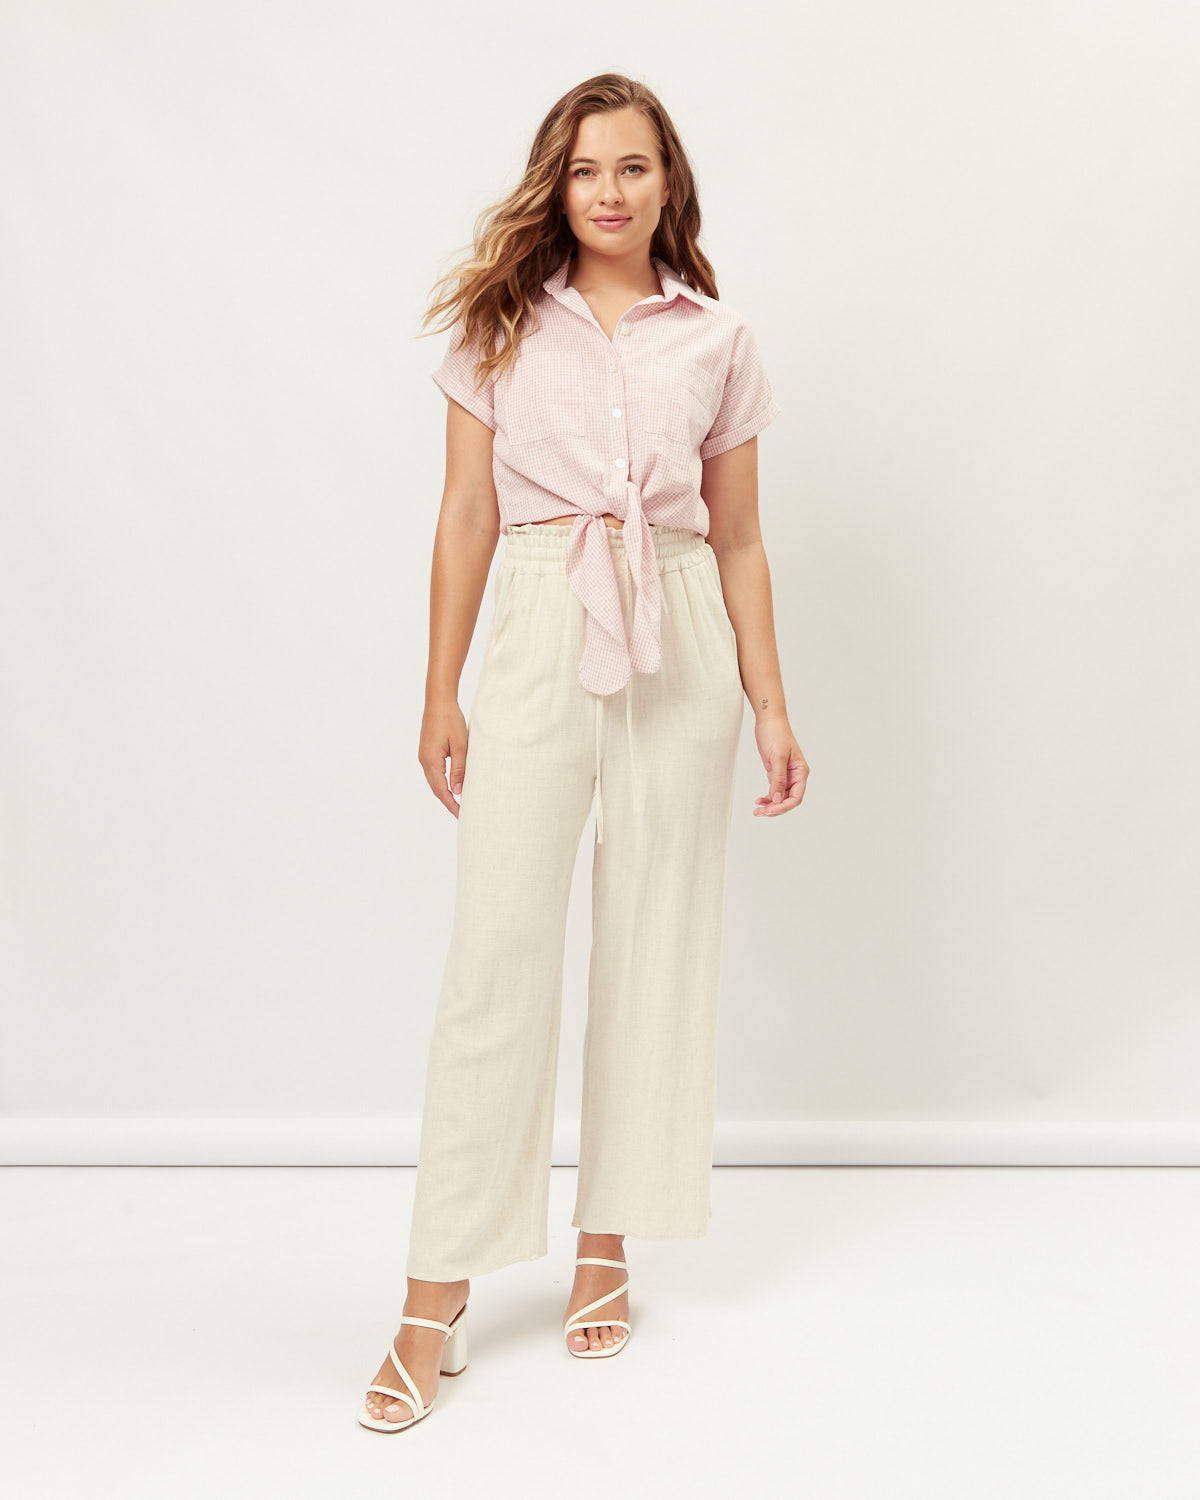 Shay Pink Revere Collar Tie Front Shirt